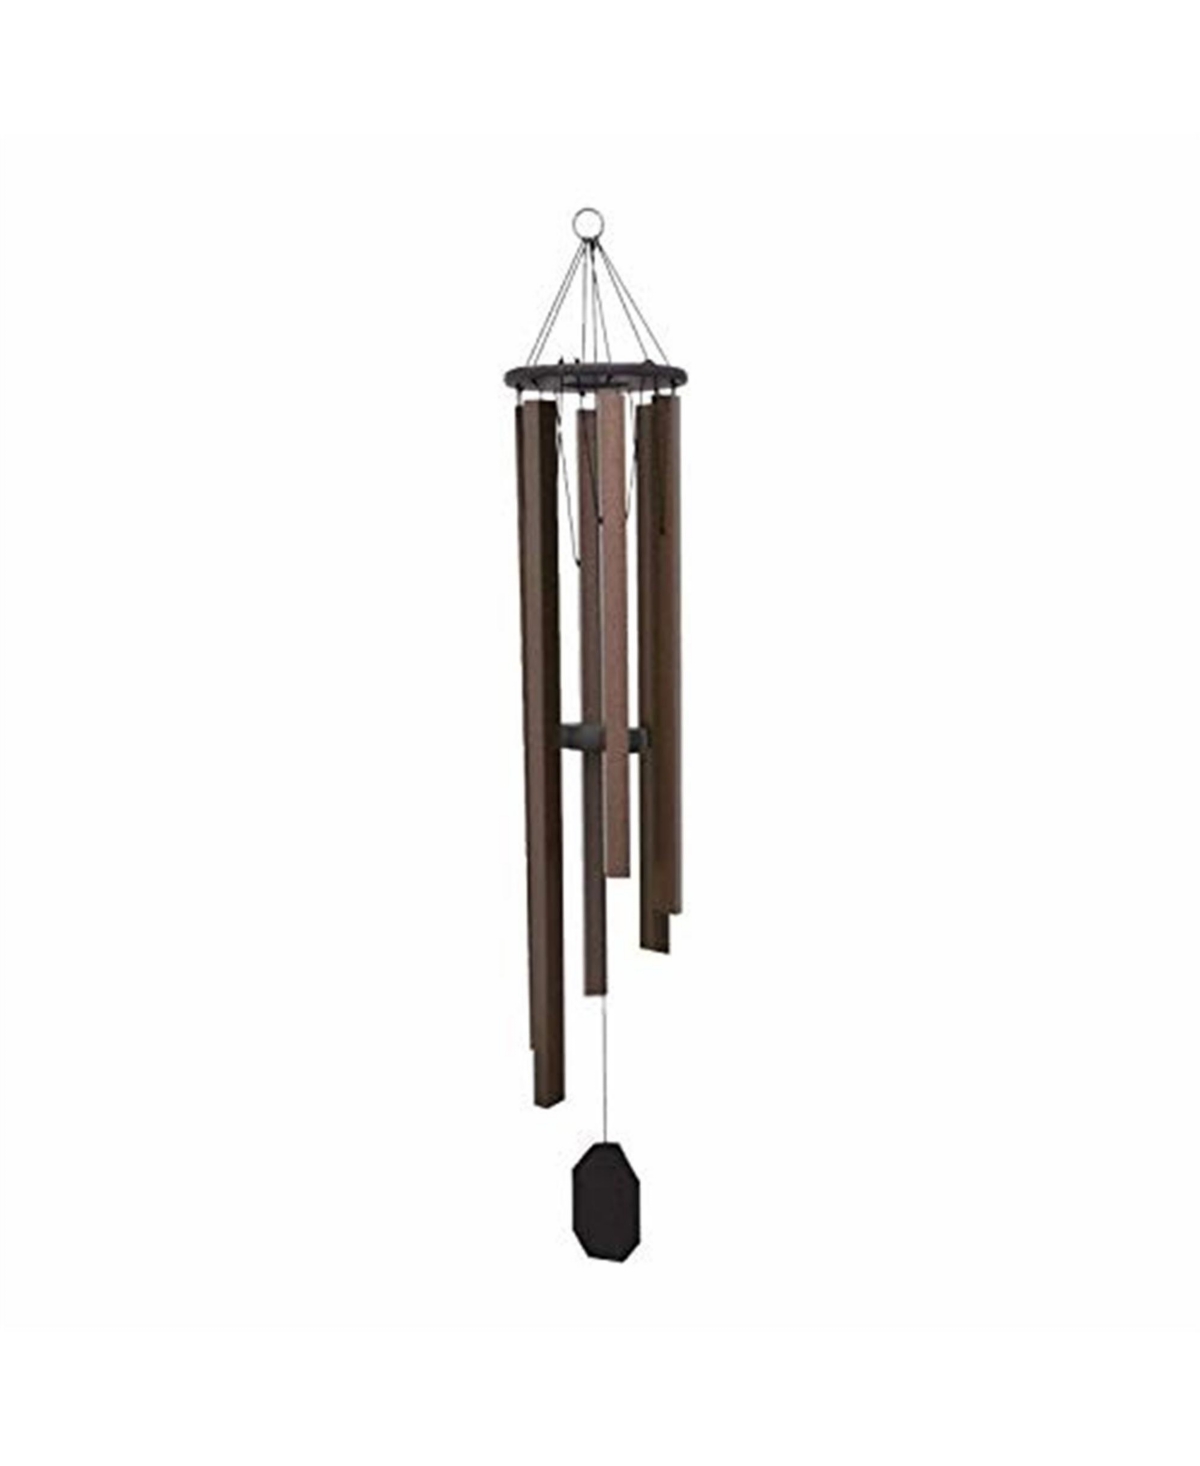 Lambright Charms Mountain Serenade Wind Chime Amish Crafted, 42in - Multi